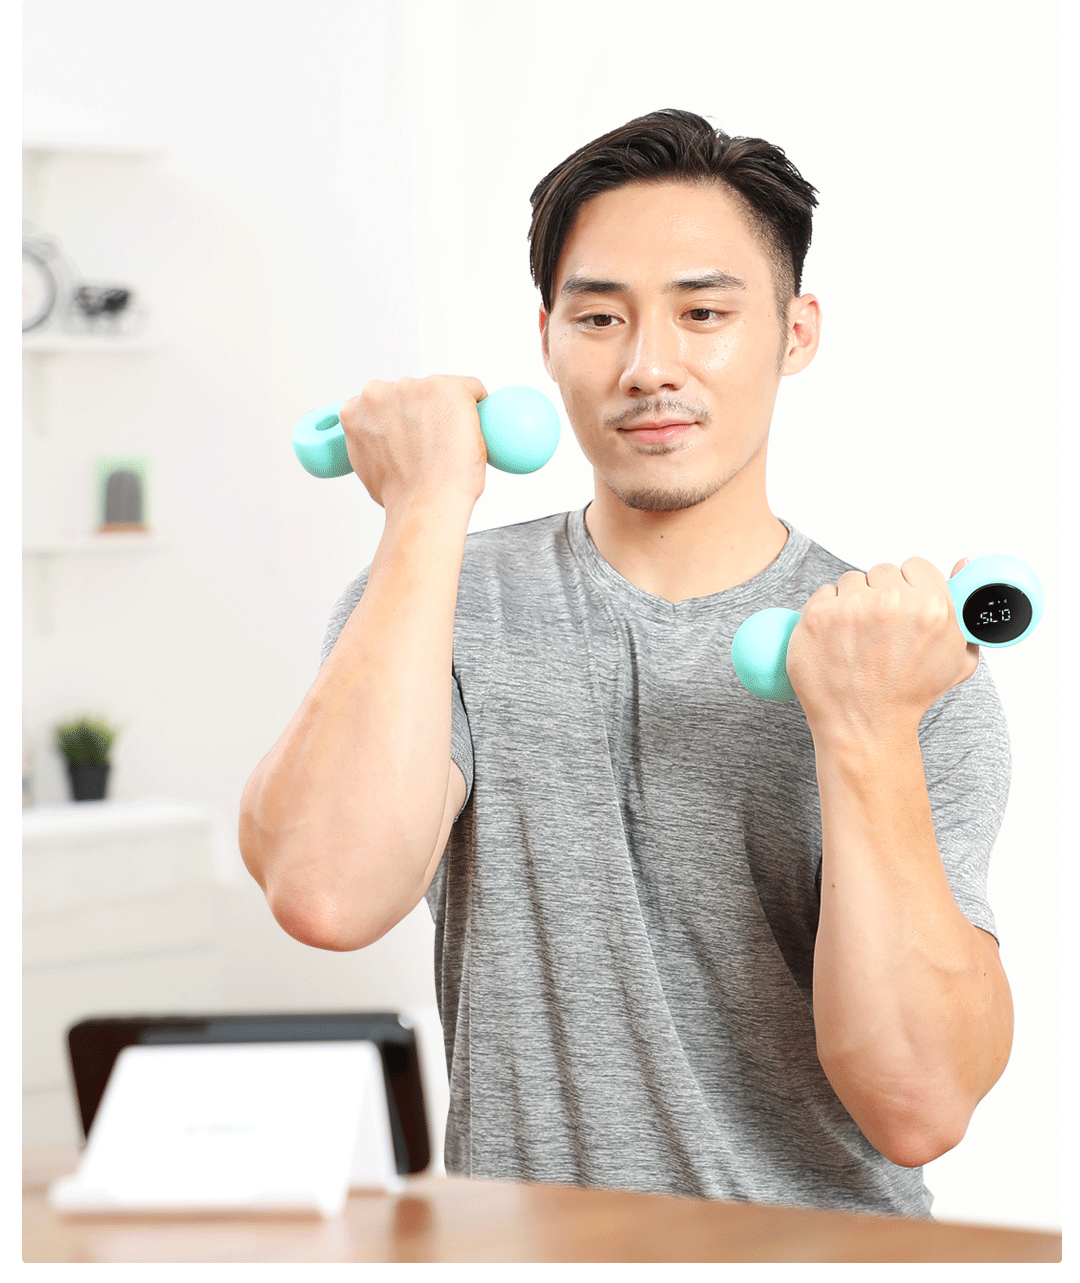 "MOVE IT" Smart dumbbells you can do at home! New Dumbbell Yoga Exercises to Build Muscle and Lose Fat